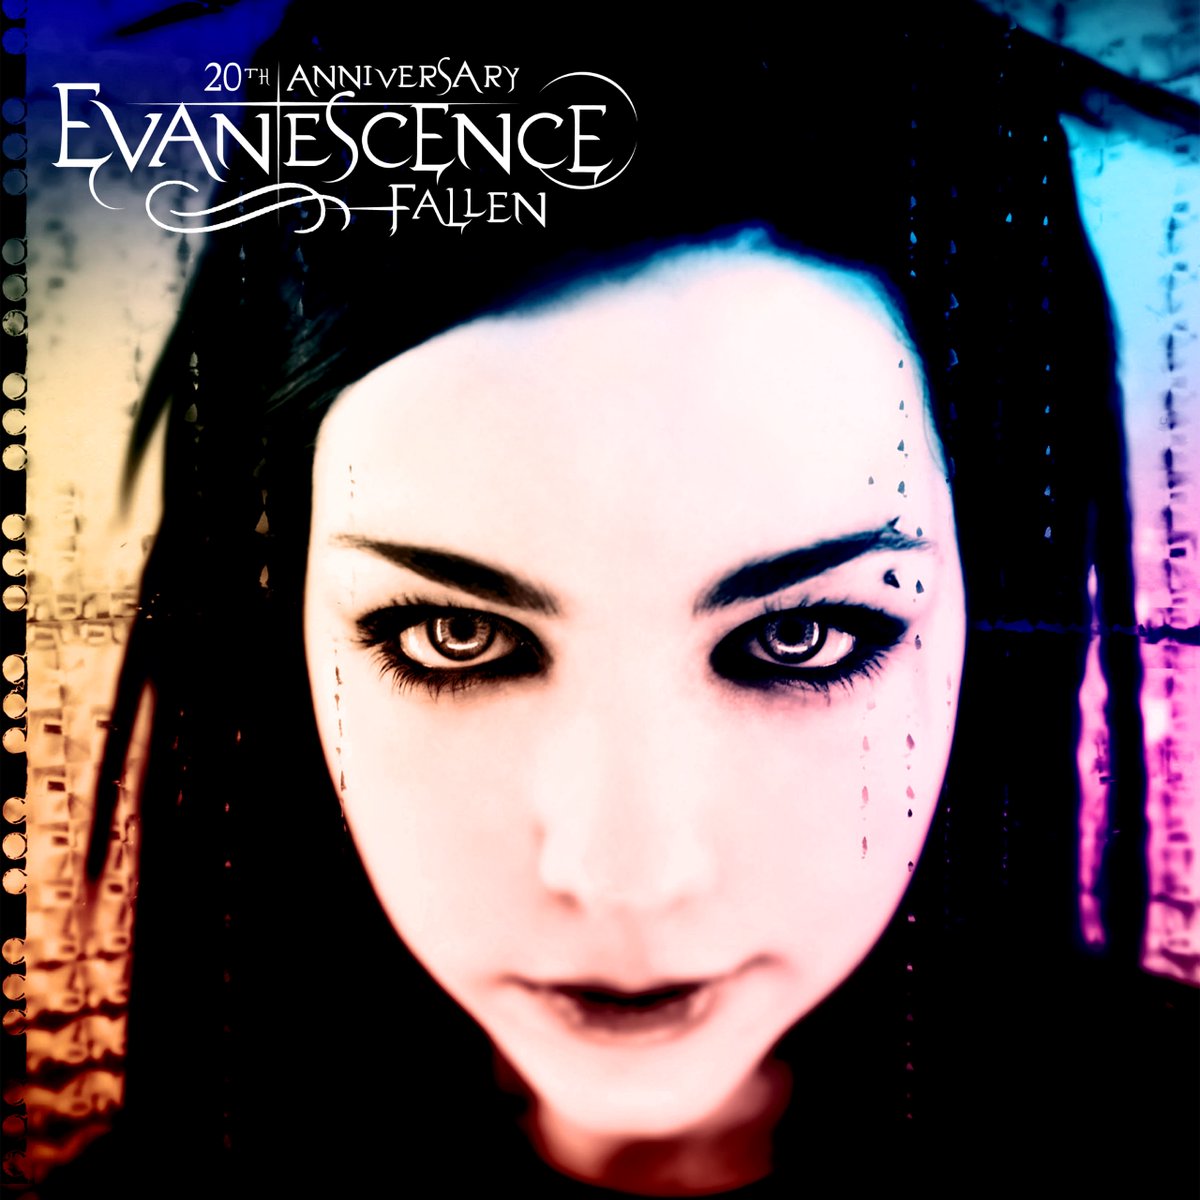 Huge congratulations to @evanescence and @craftrecordings for their @musicweek nomination for the #FALLEN catalogue campaign. 🤞🤞🤞🤞🙌